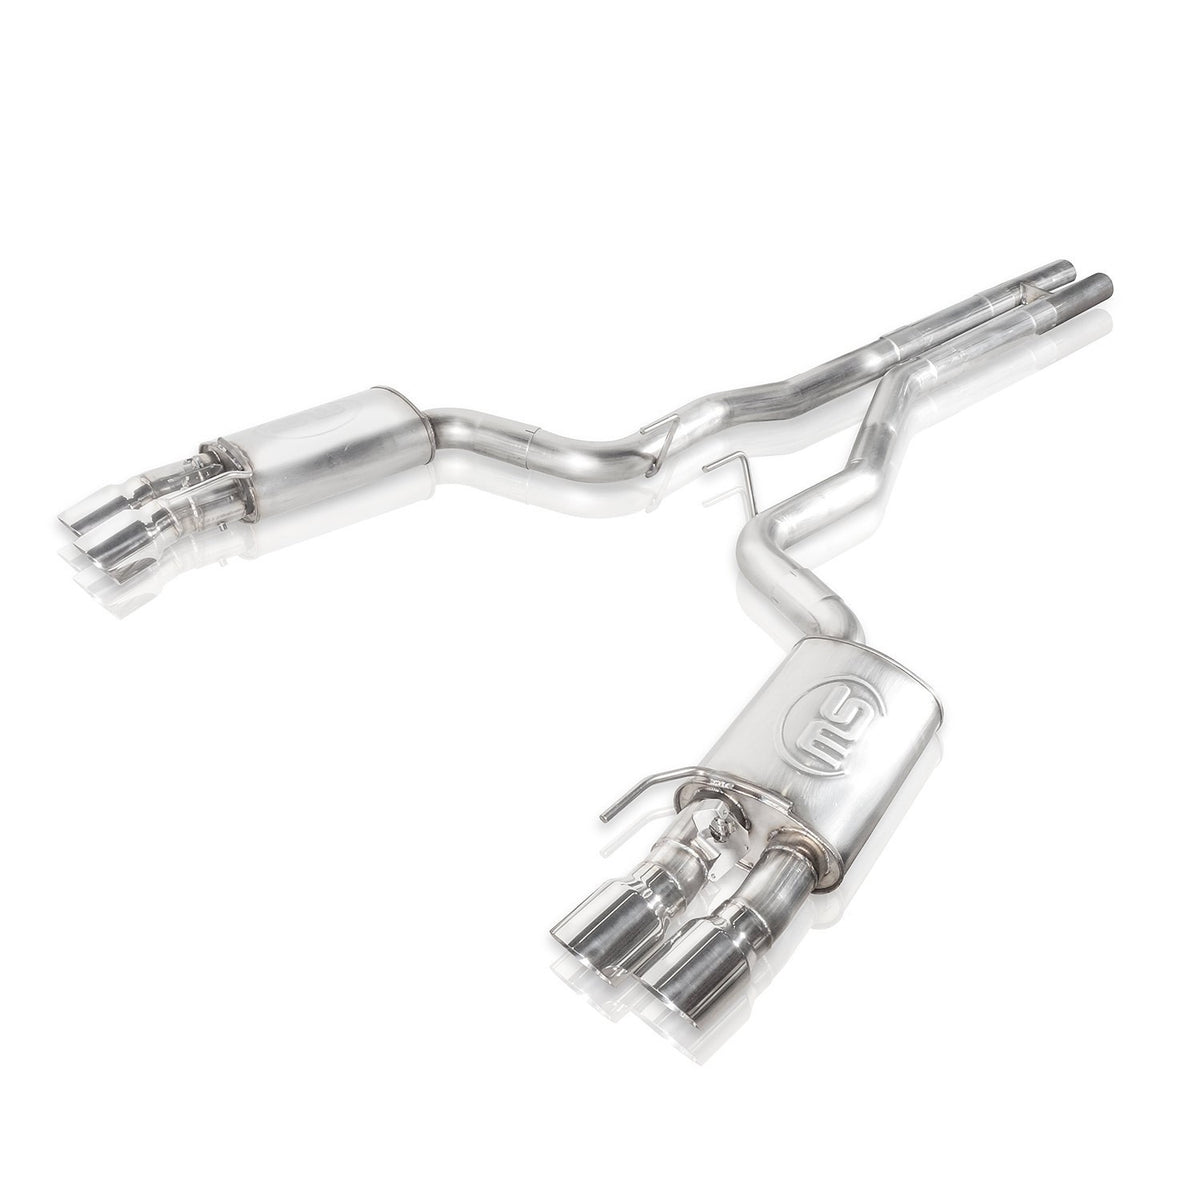 STAINLESS WORKS Mustang GT 5.0L 2018-2020 Redline Series (Aggressive Sound) Cat-Back Exhaust SW Header Connect H Pipe - W/ Valve